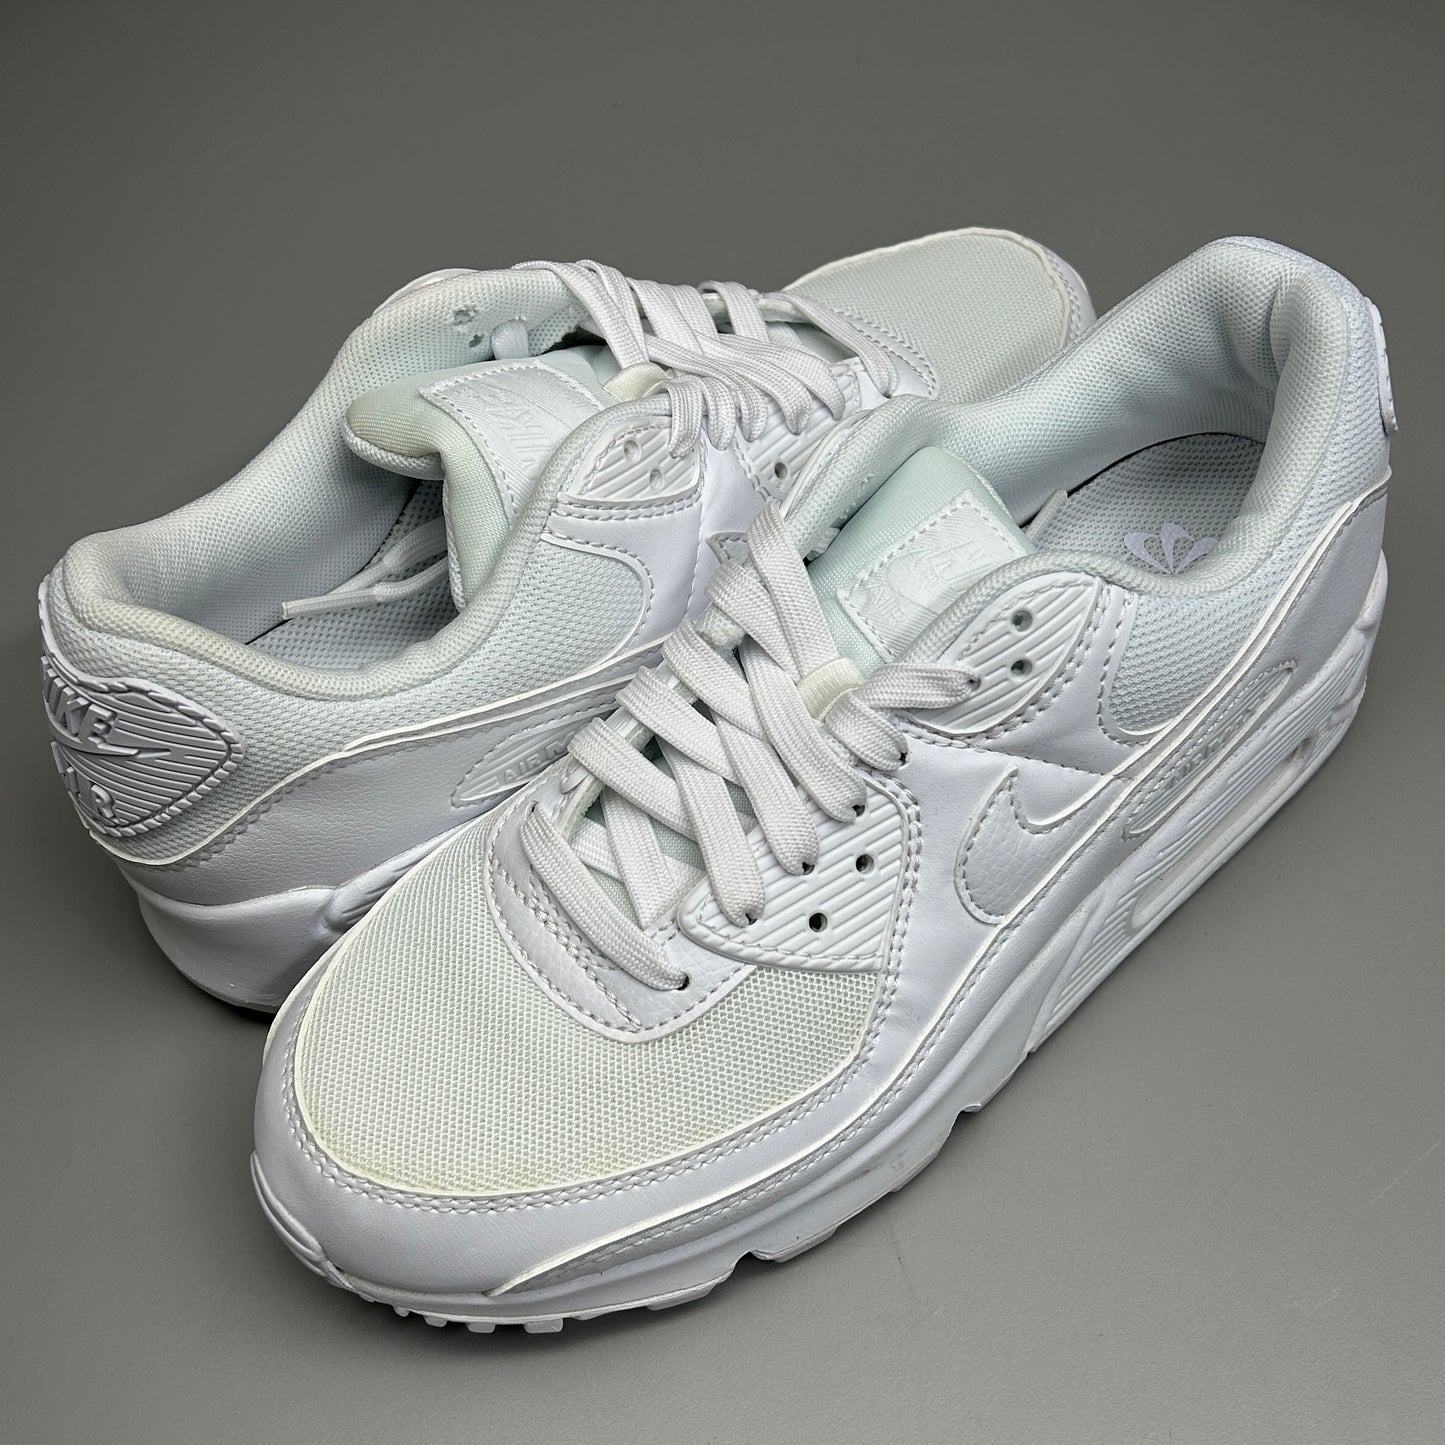 NIKE Nike Air Max 90 Women's Shoes Sz 8 White DH8010-100 (New, Slightly Damaged)